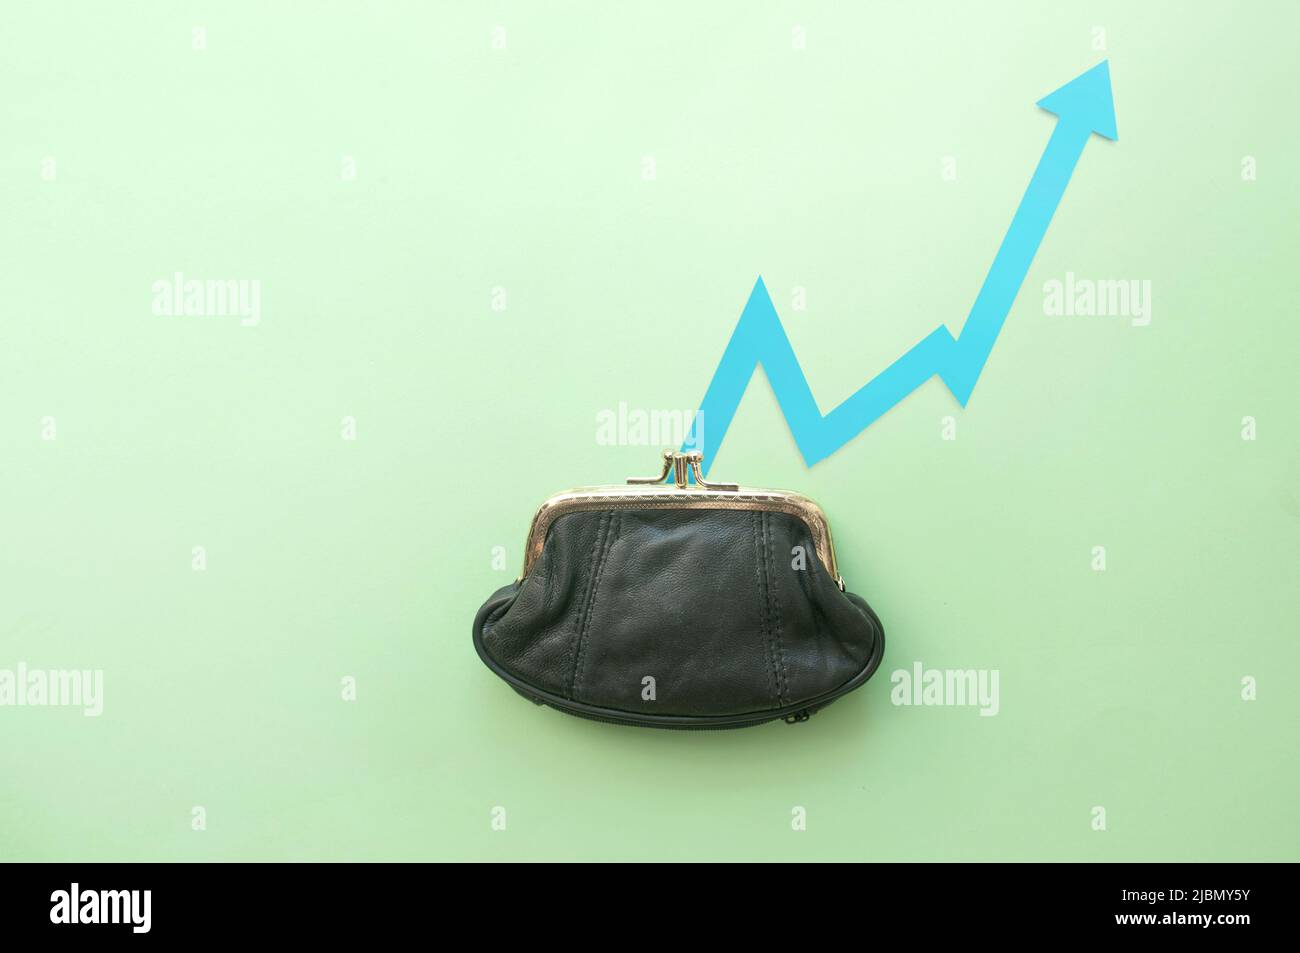 Purse with arrow on the rise Stock Photo